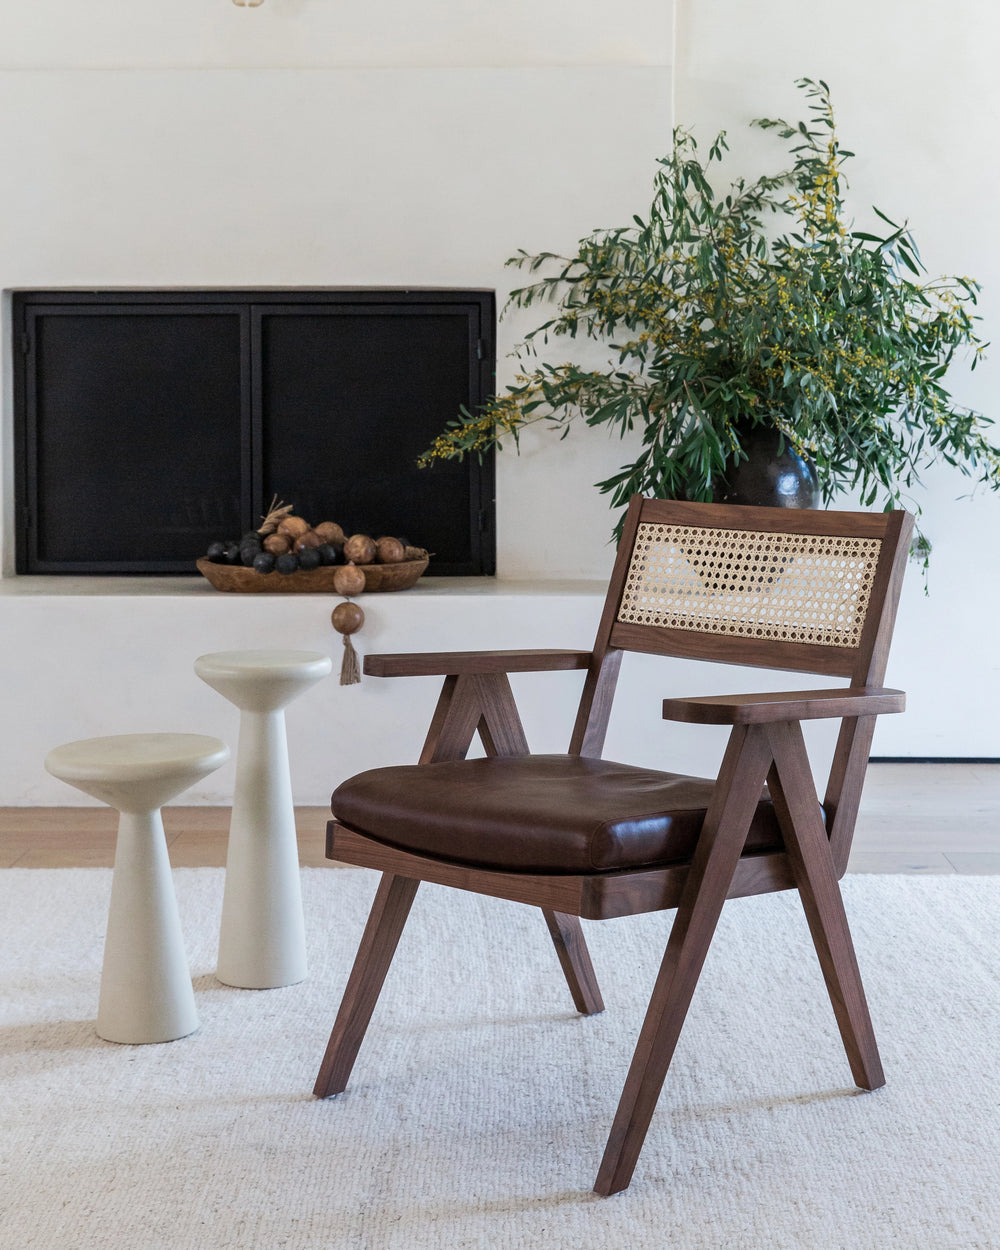 A contemporary room featuring a dark wooden Lark Accent Chair with a woven cane backrest and a smooth brown leather seat. The chair is accompanied by two cream-colored, cone-shaped side stools, adding a modern touch to the space.